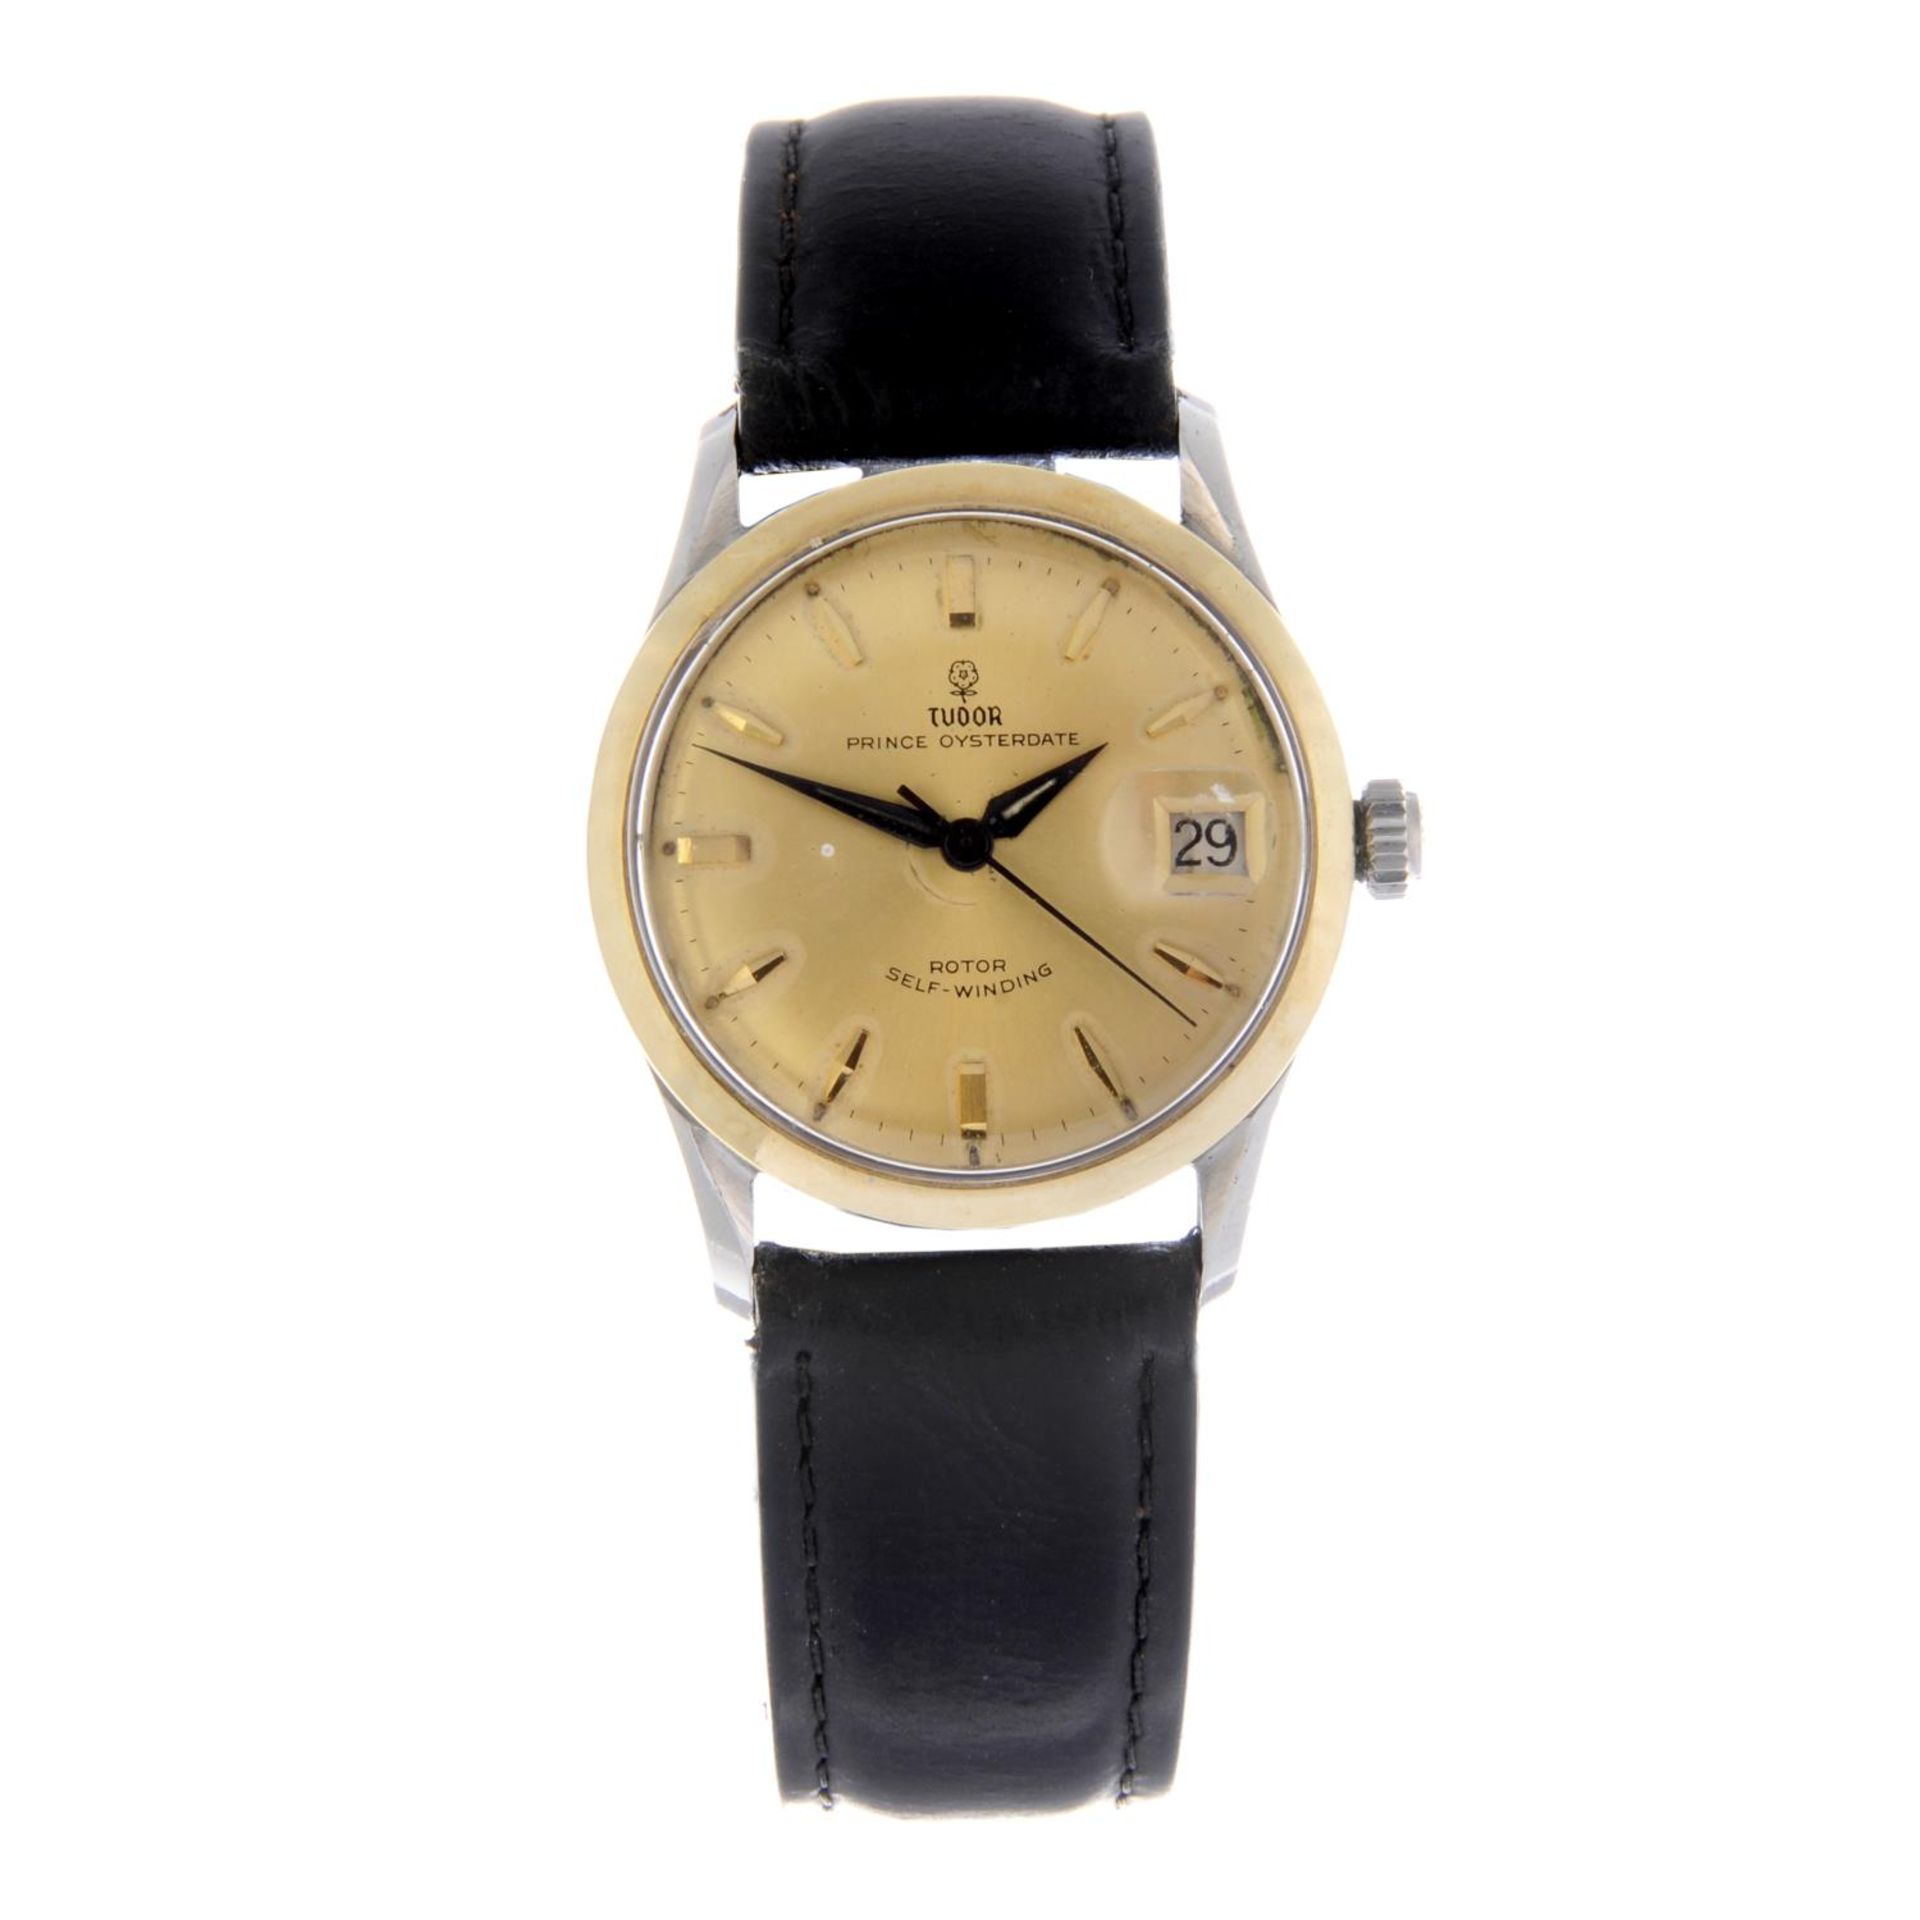 TUDOR - a gentleman's Prince Oysterdate wrist watch. Stainless steel case with yellow metal bezel.